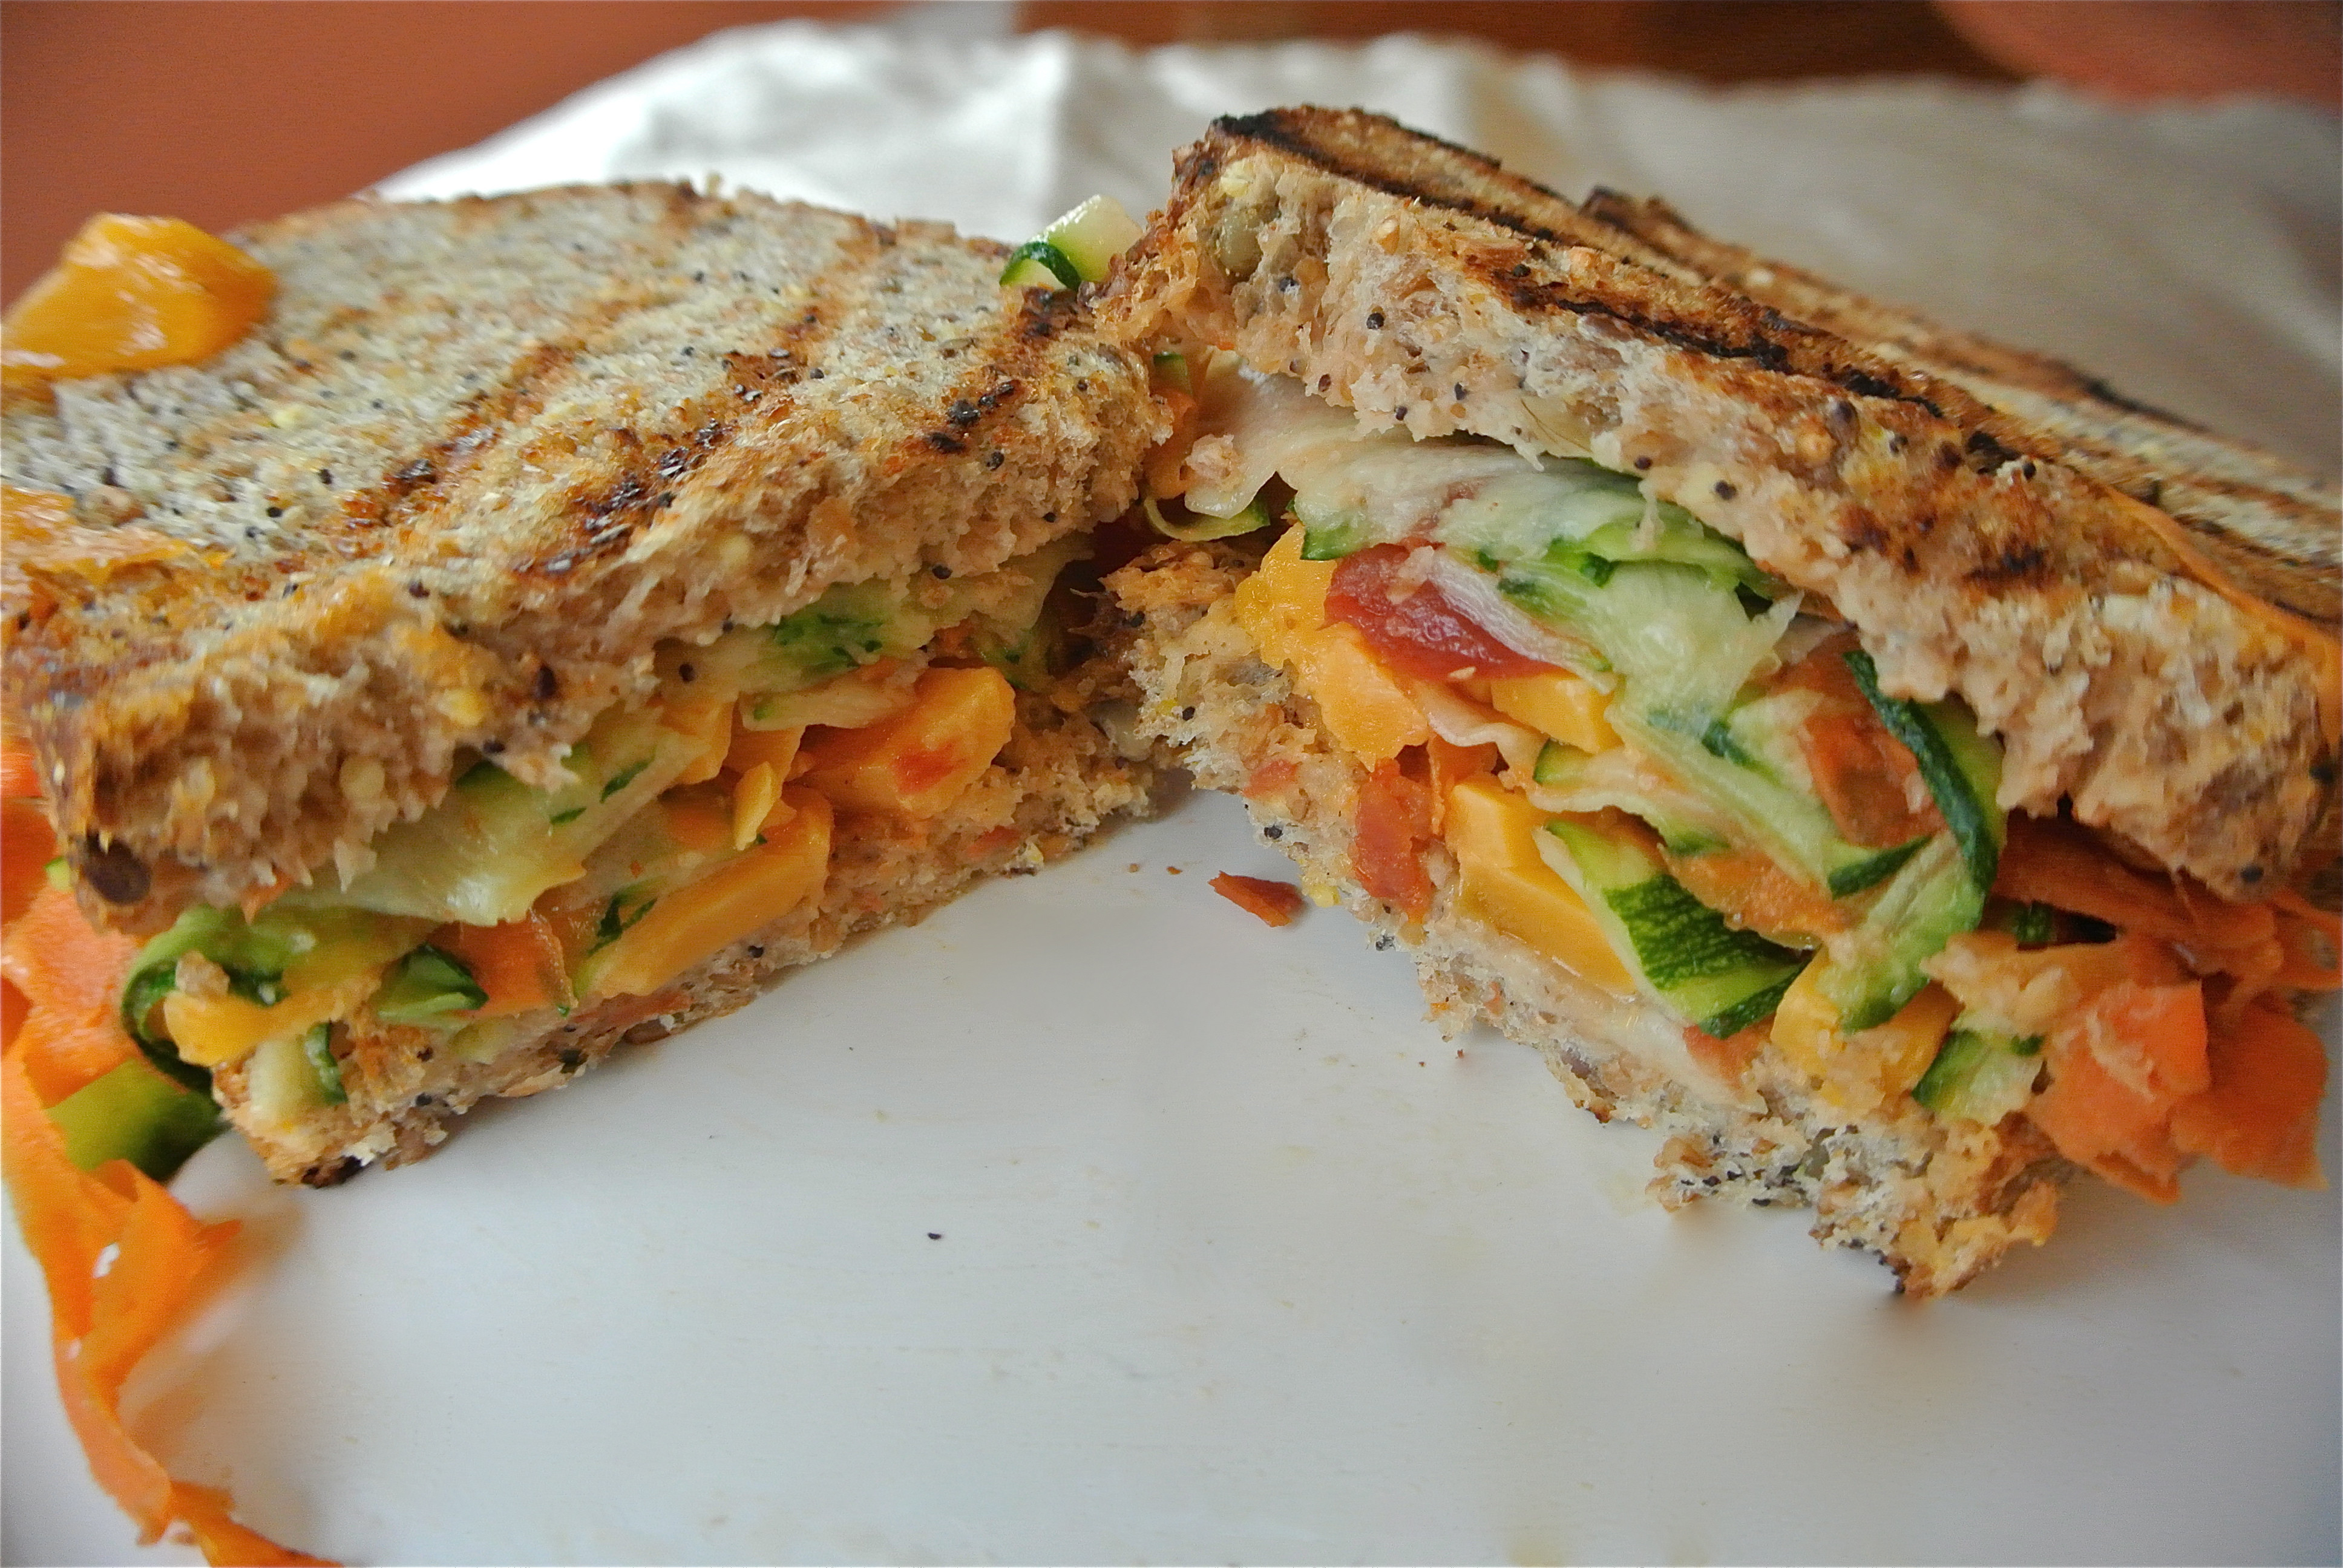 Vegetarian Panini Ideas
 Cheese and Ve able Panini Meatless Monday